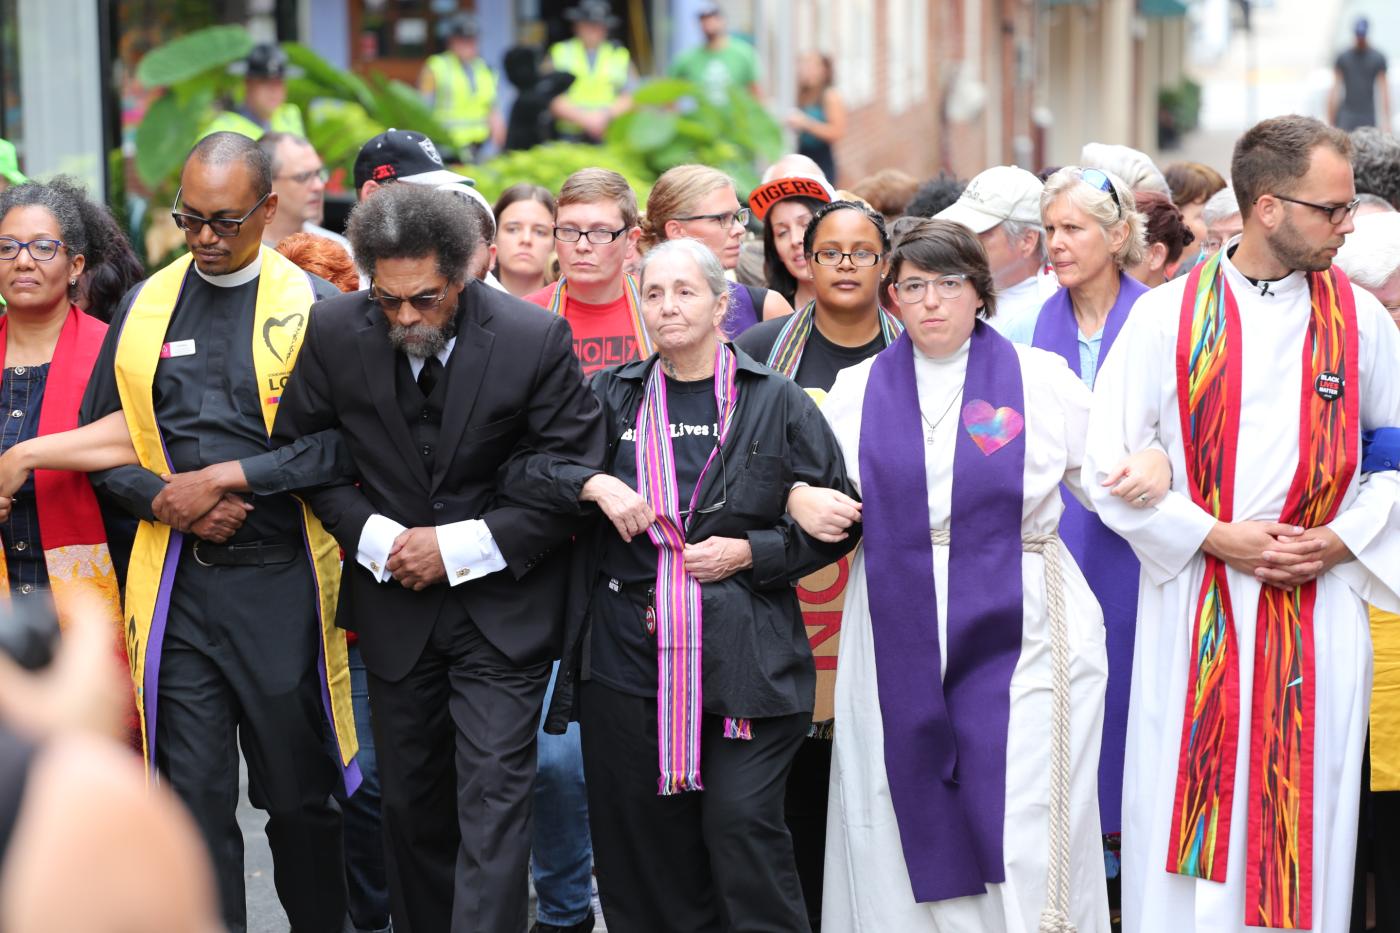 Clergy takes a stand united in Christ against white supremacy and all forms of racism by marching in silent protest through Charlottesville, USA, August 2017, Photo: Steven D. Martin/NCCUSA